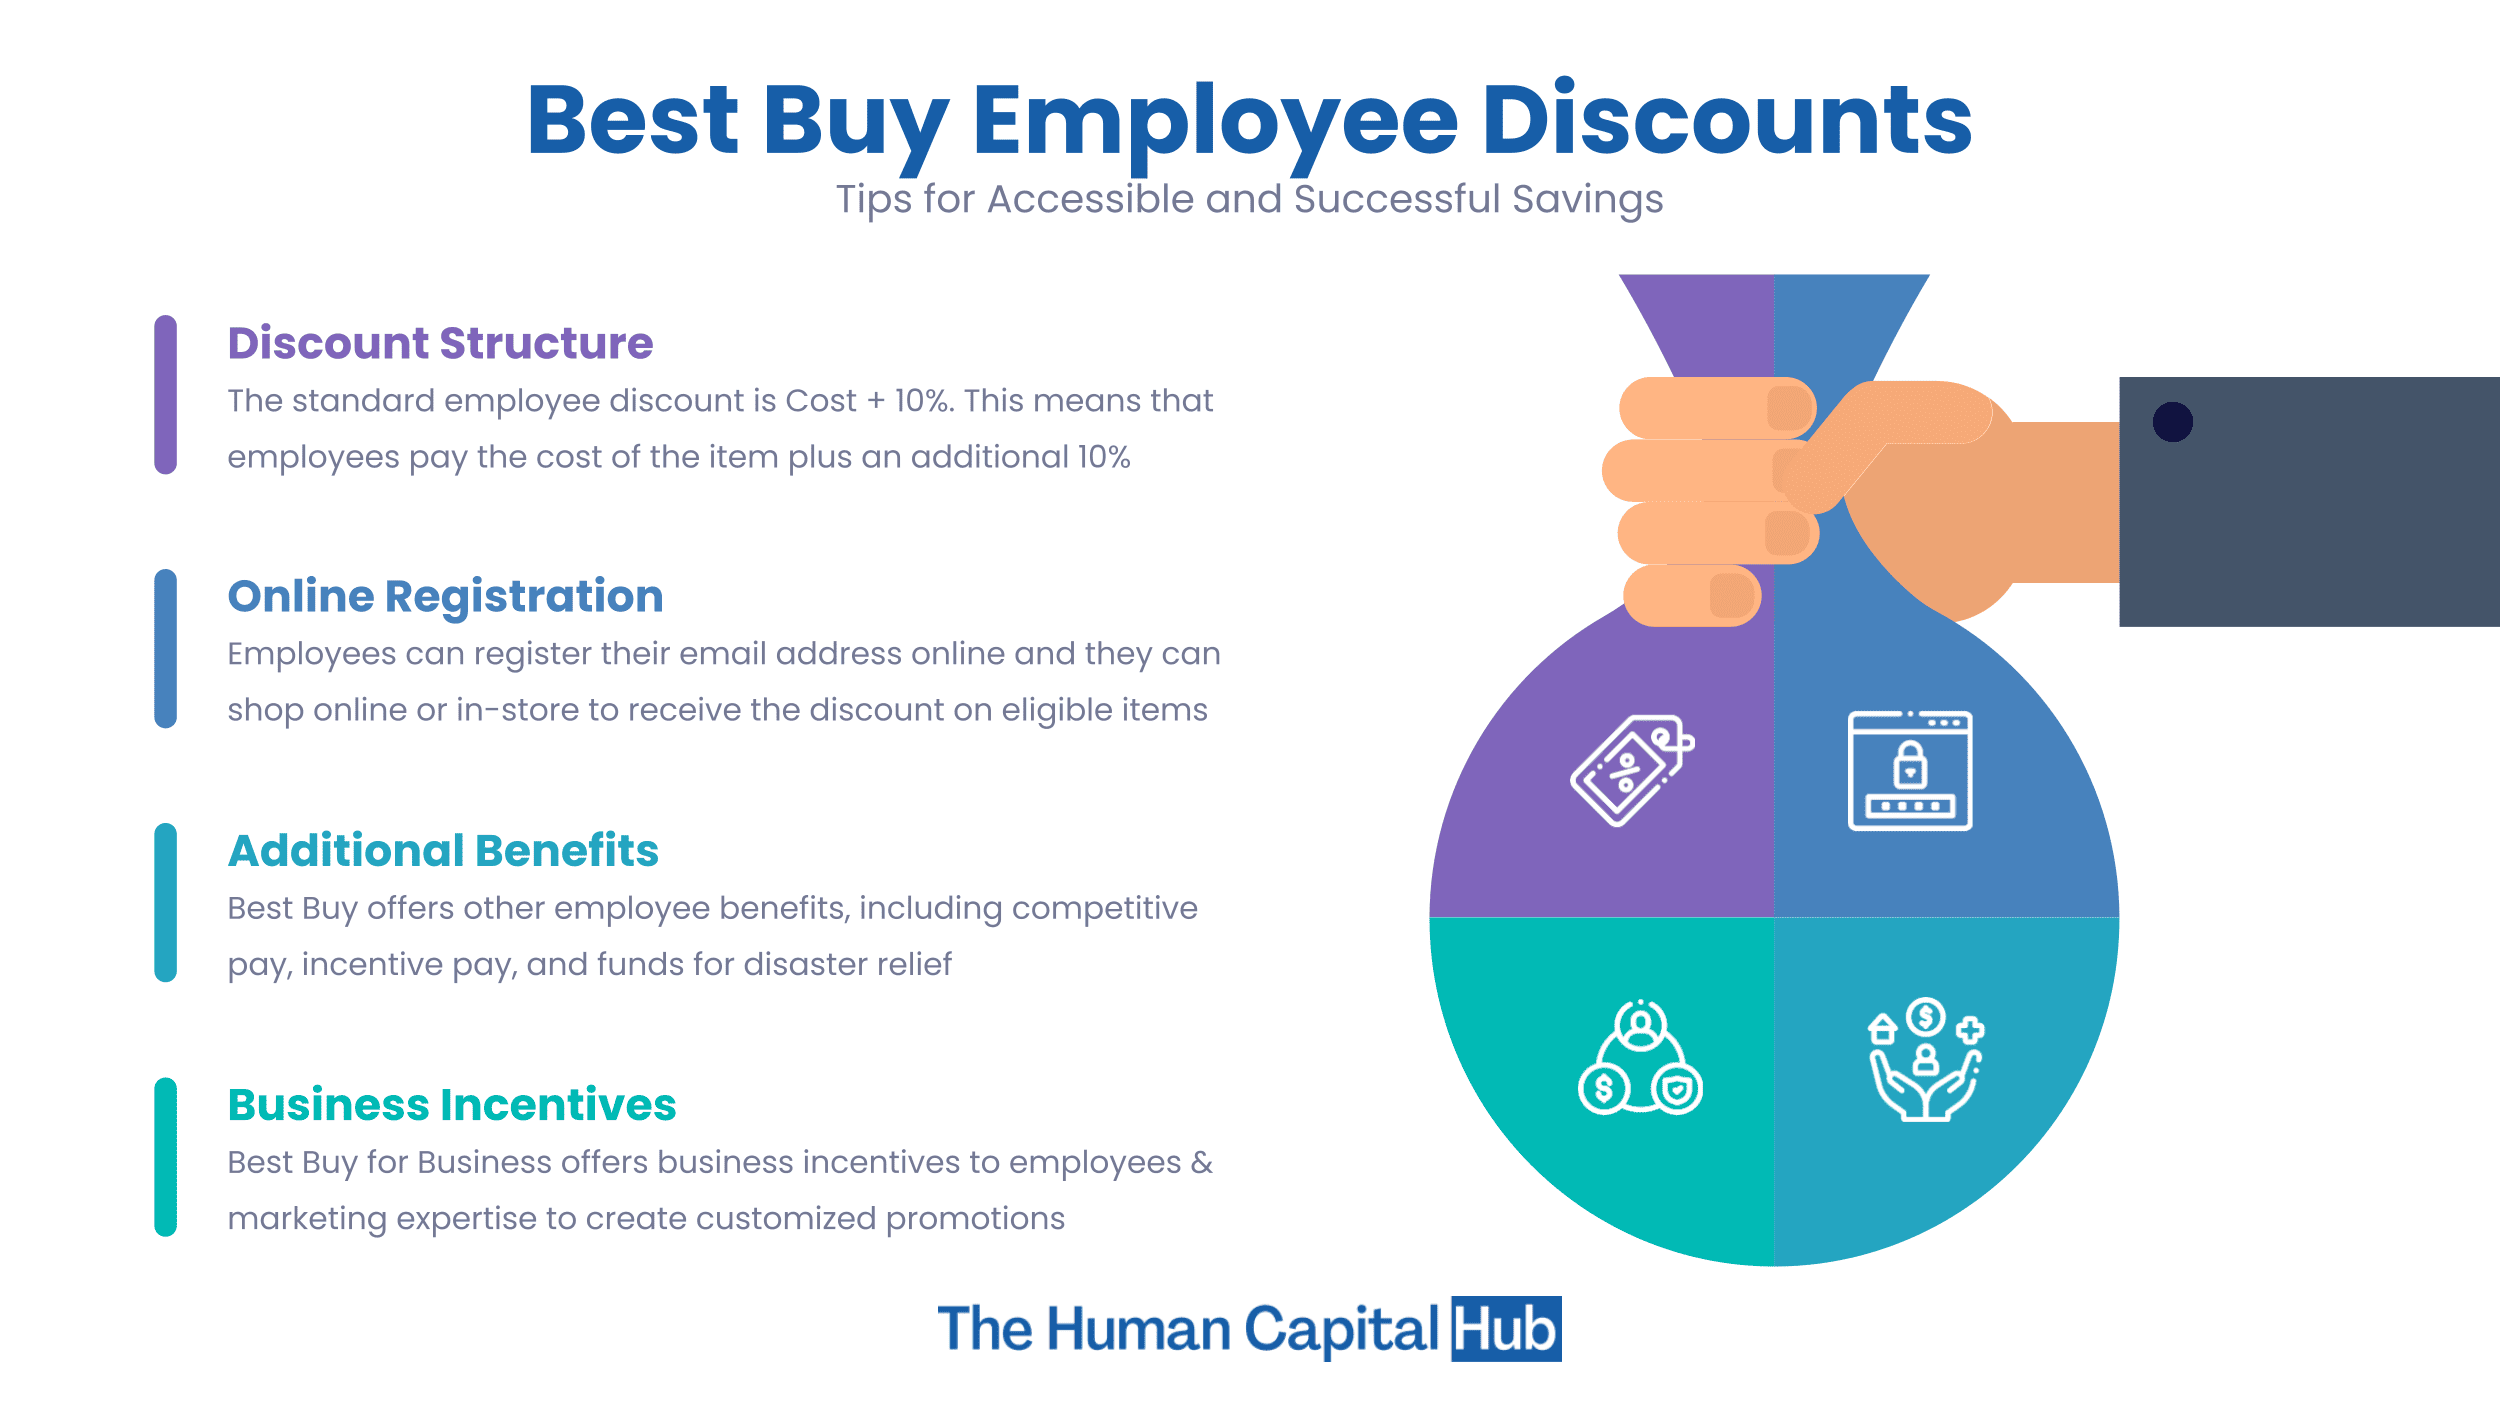 Best Buy Discounts for Employees: All You Need to Know